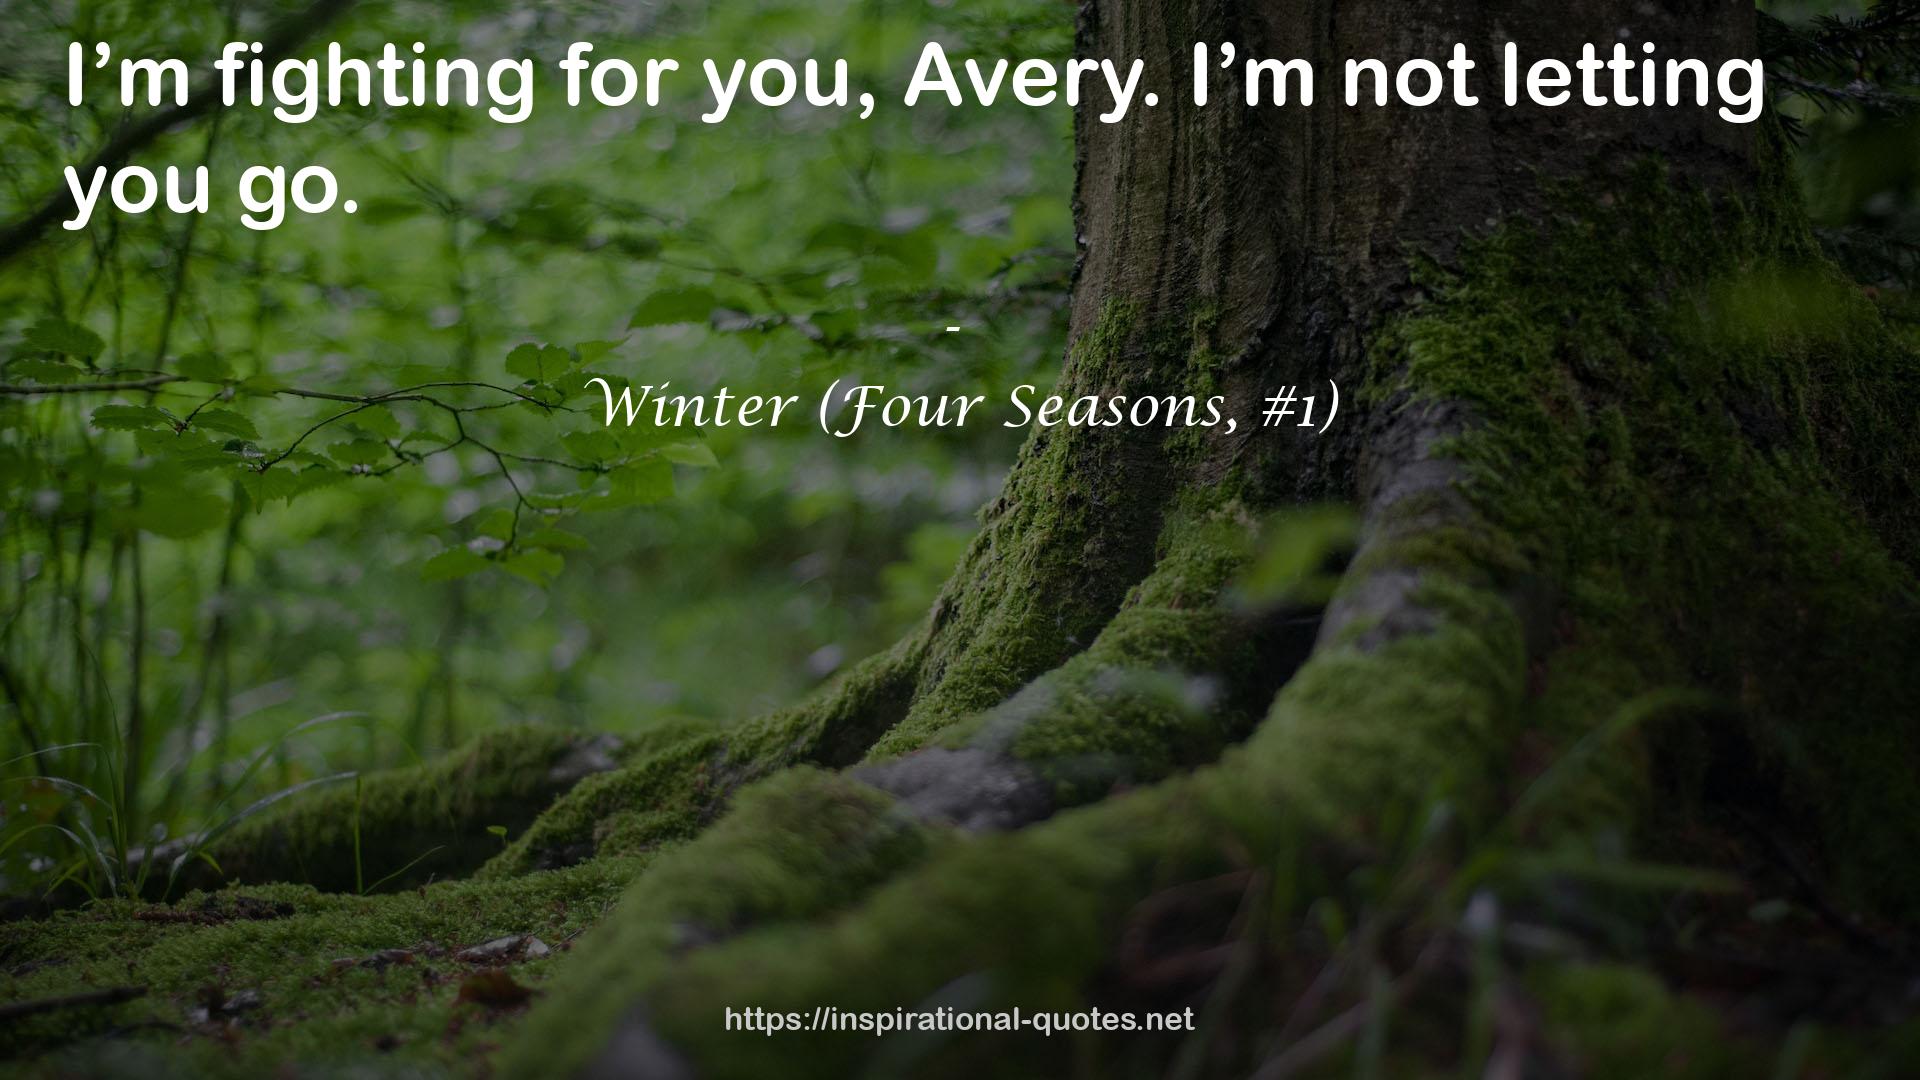 Winter (Four Seasons, #1) QUOTES